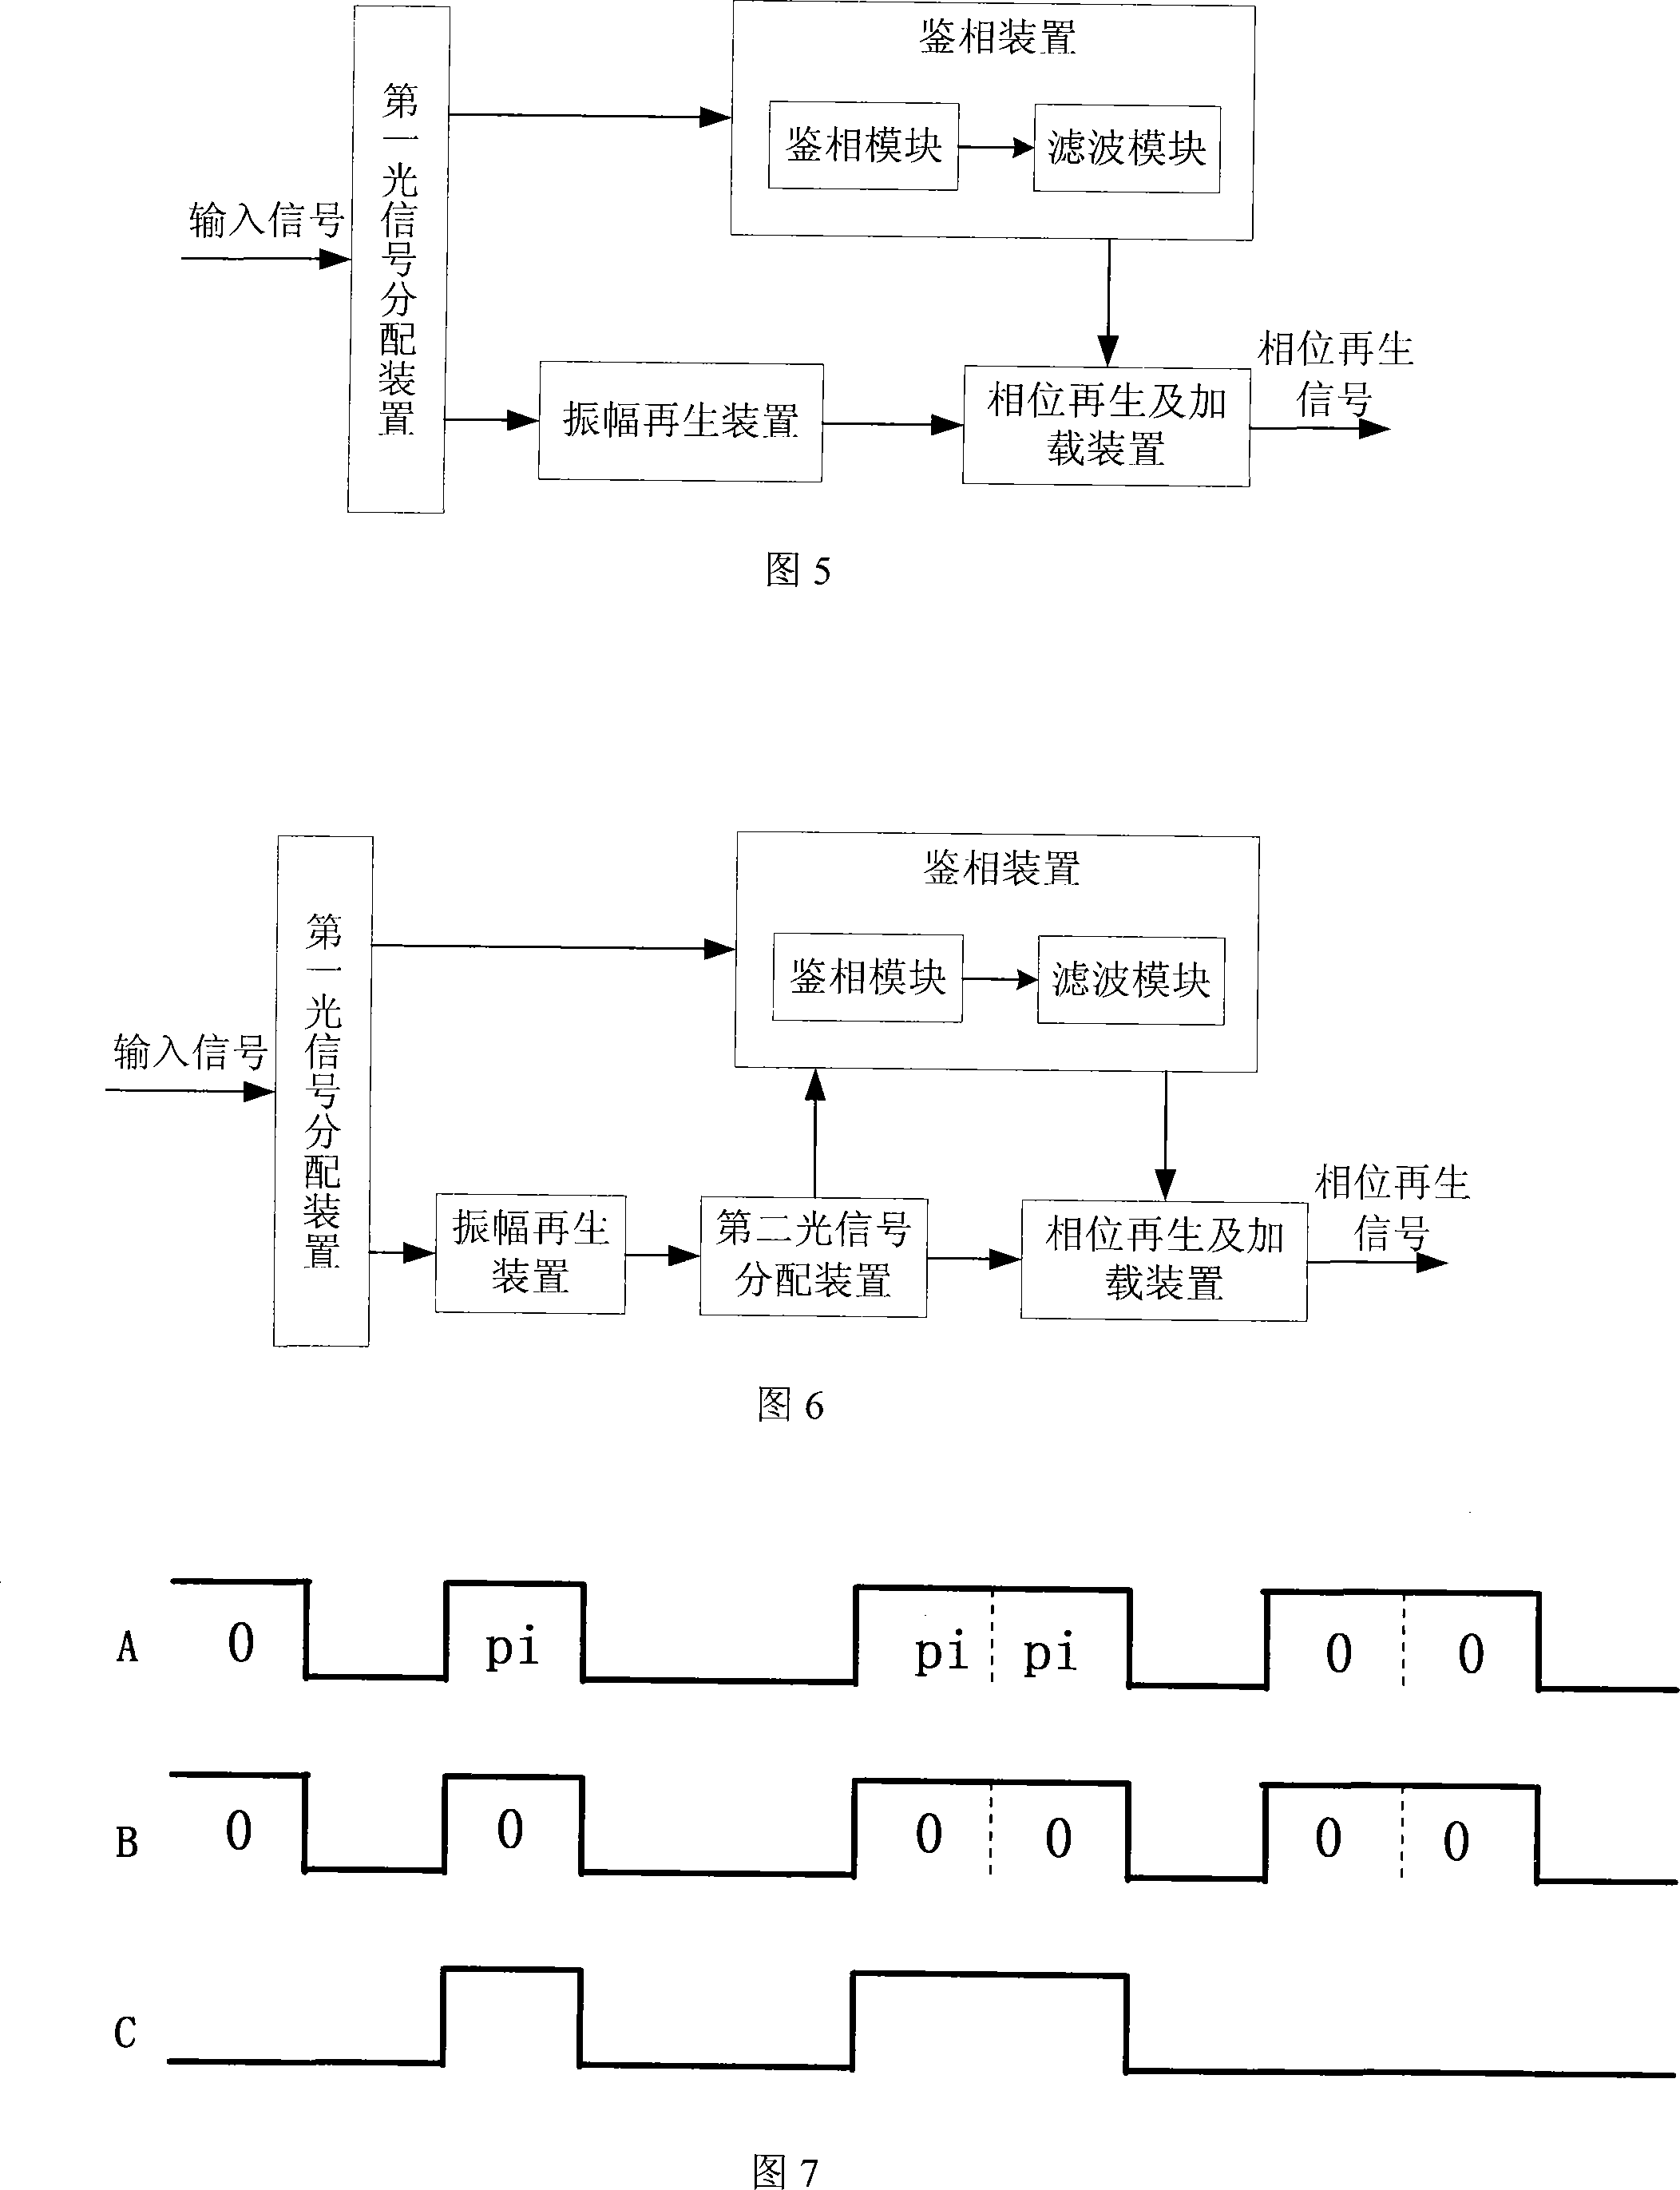 Optical relay system and method